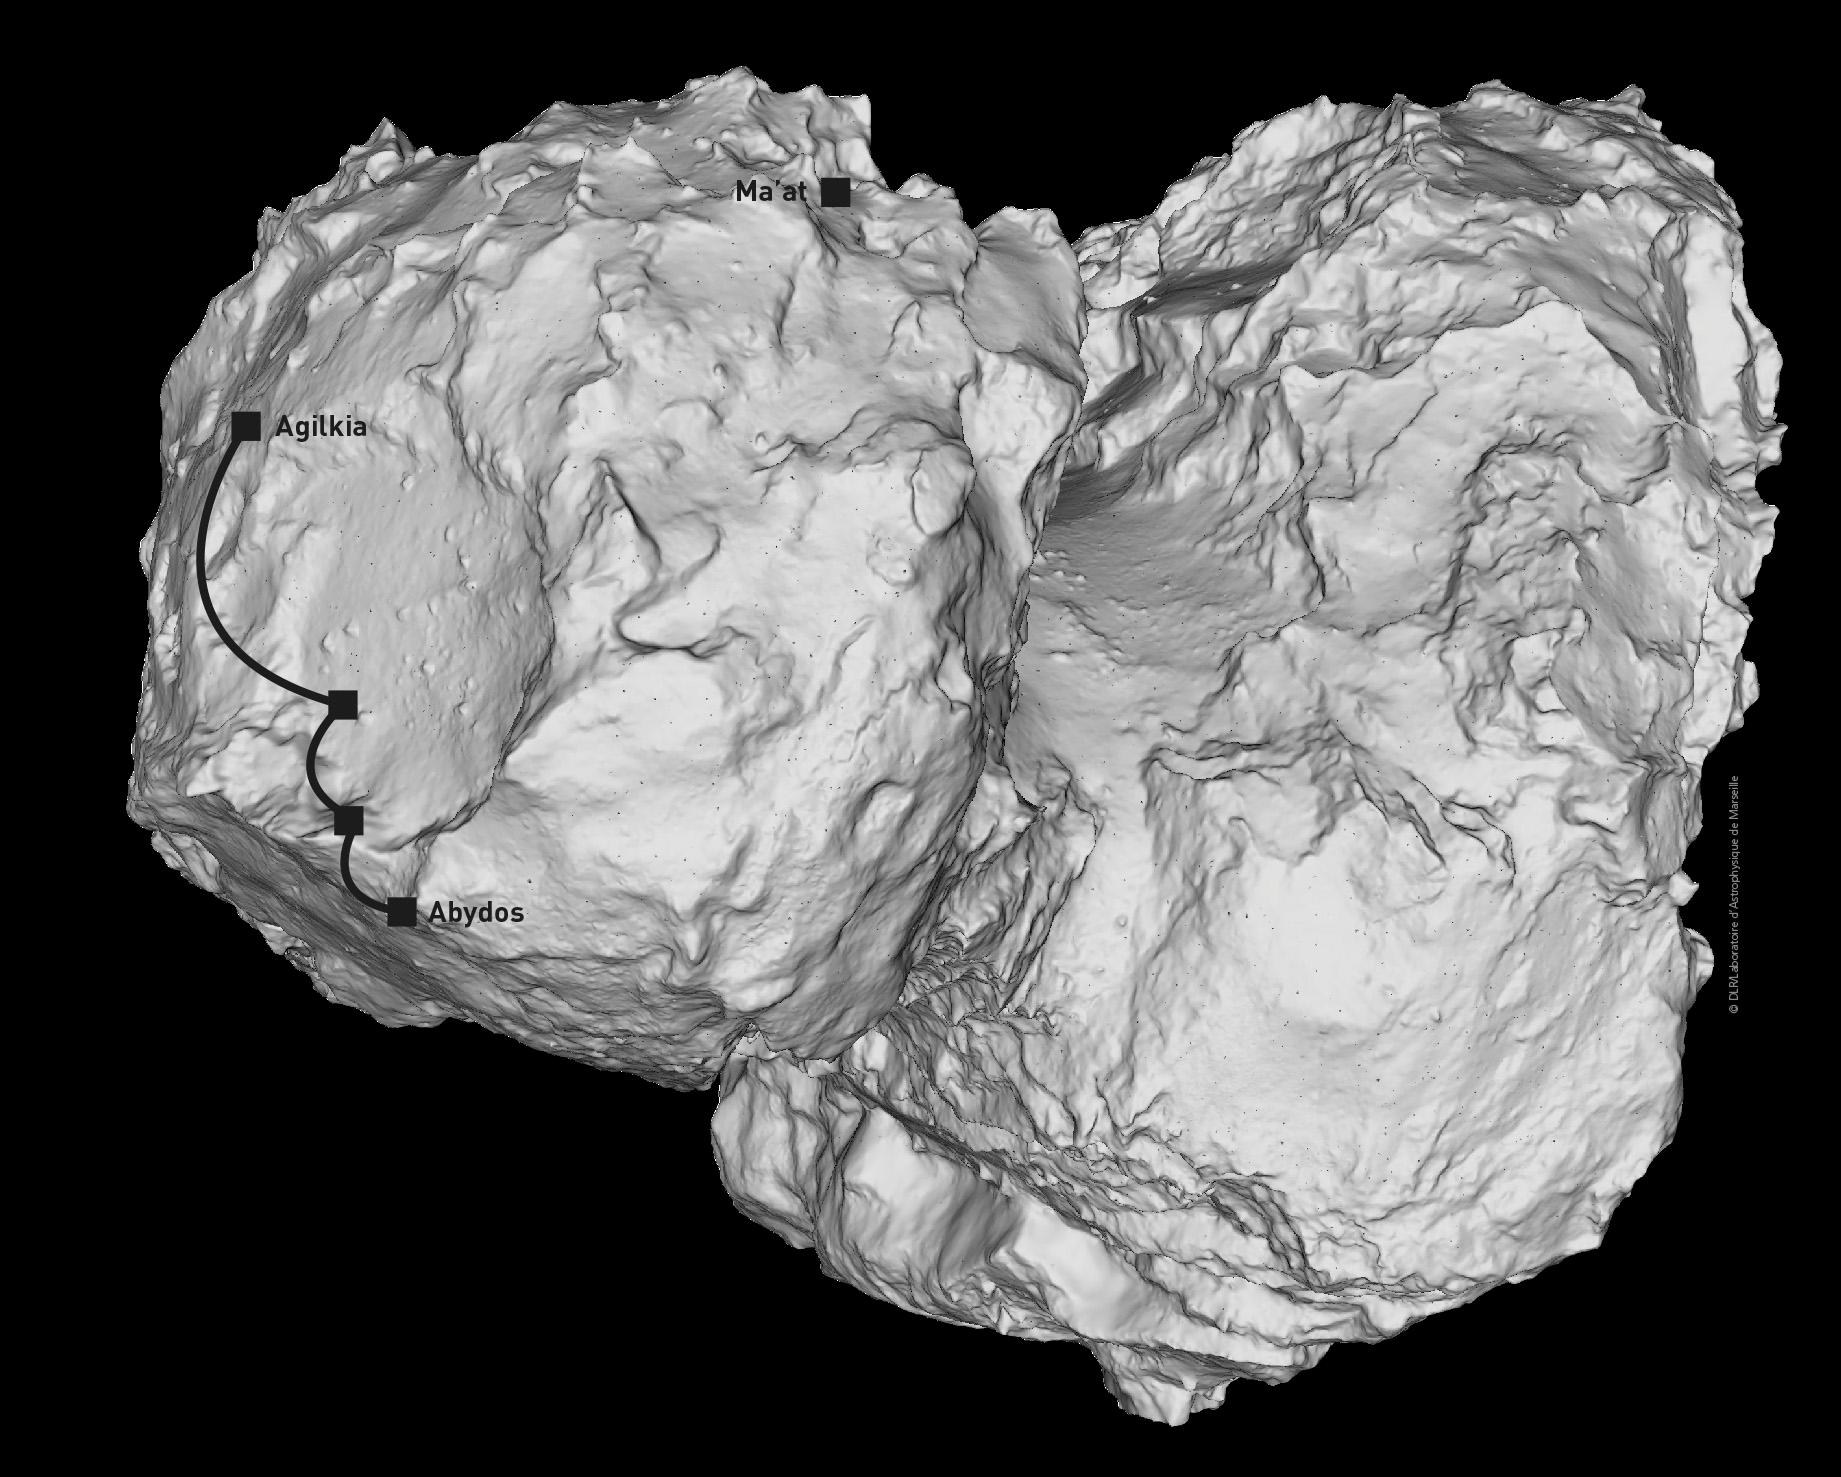 Rosetta mission drew to an end on 30 September 2016